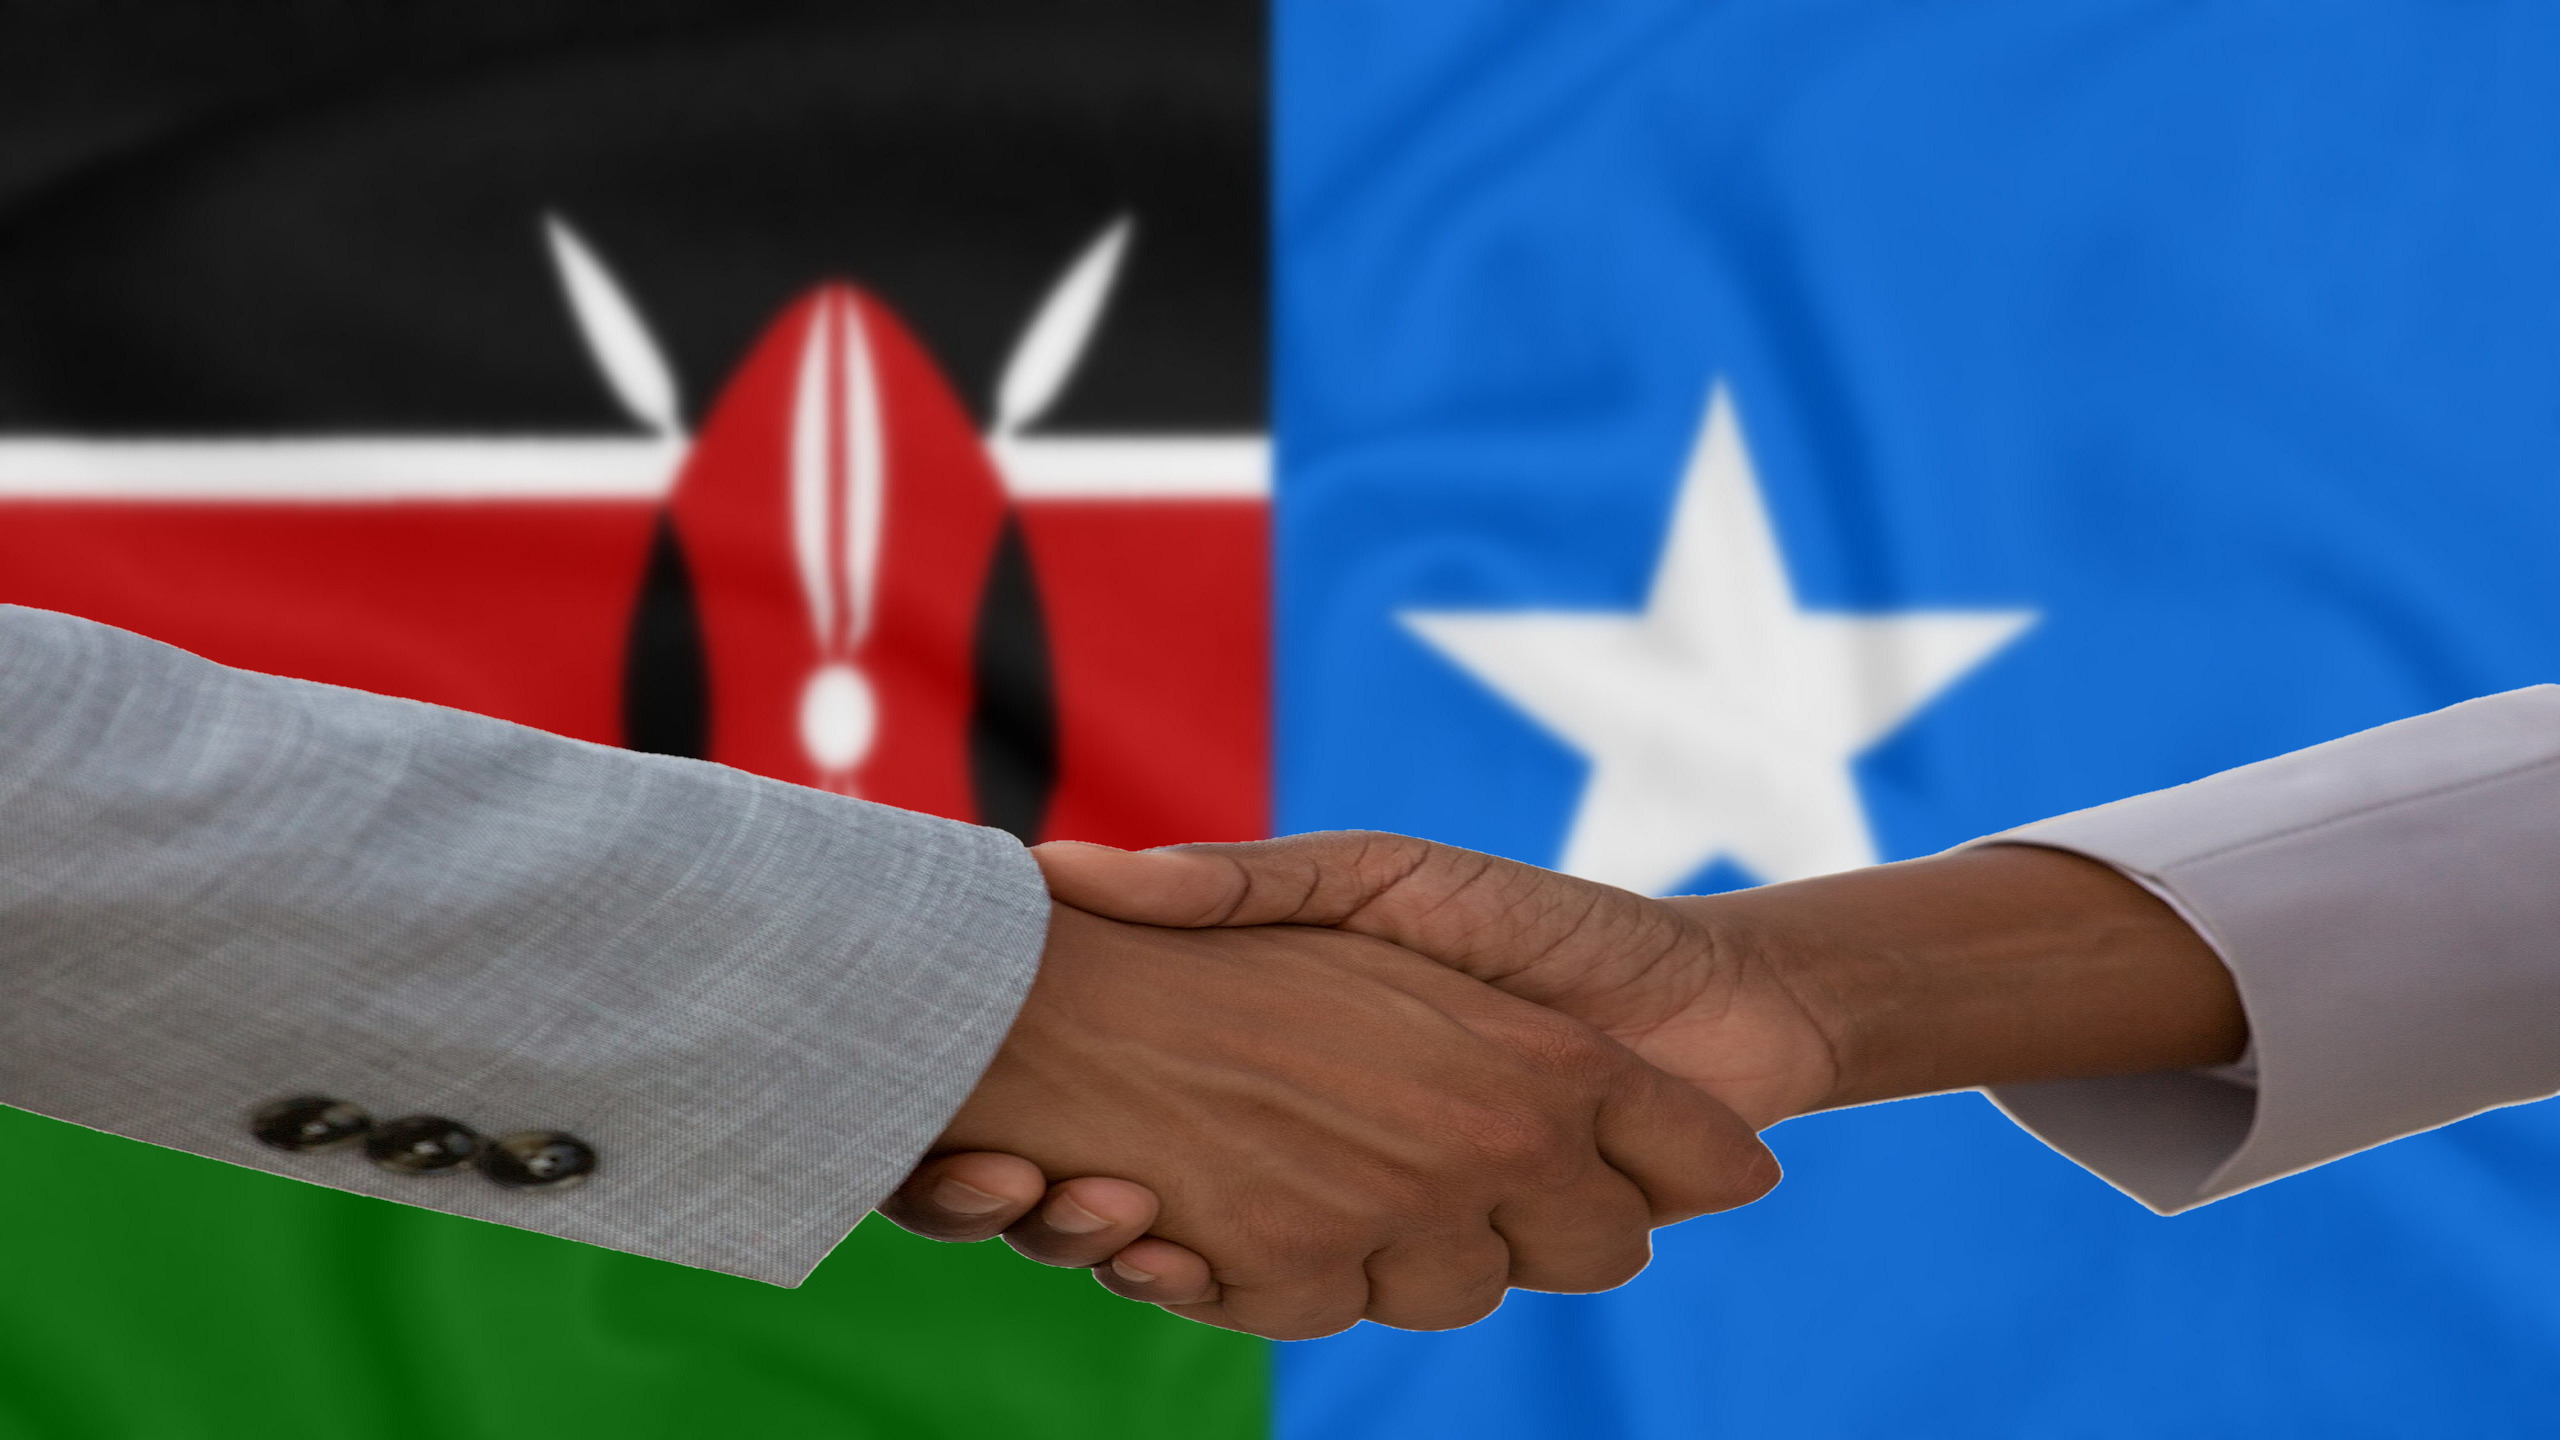 Kenya, Somalia Strengthen Bilateral Ties With New Collaboration Agreement